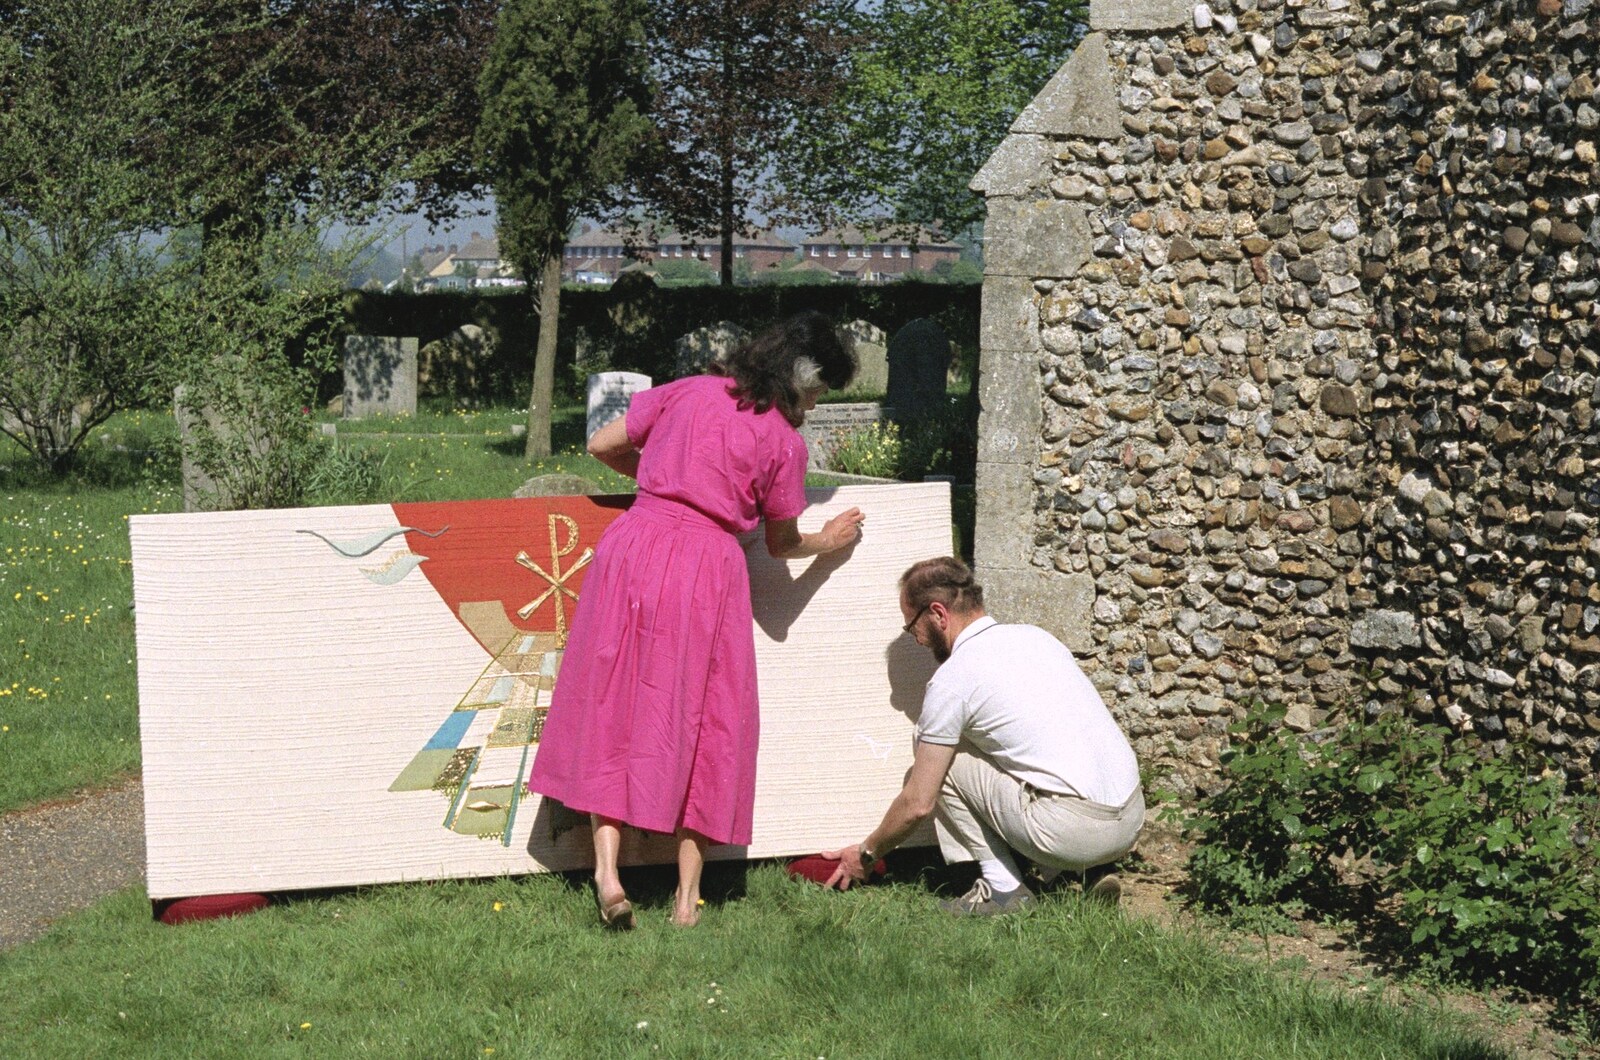 Isobel and Baz set up for a photo session from Tapestry With Baz, and a Trip to Blakeney, Suffolk and Norfolk - 14th May 1990